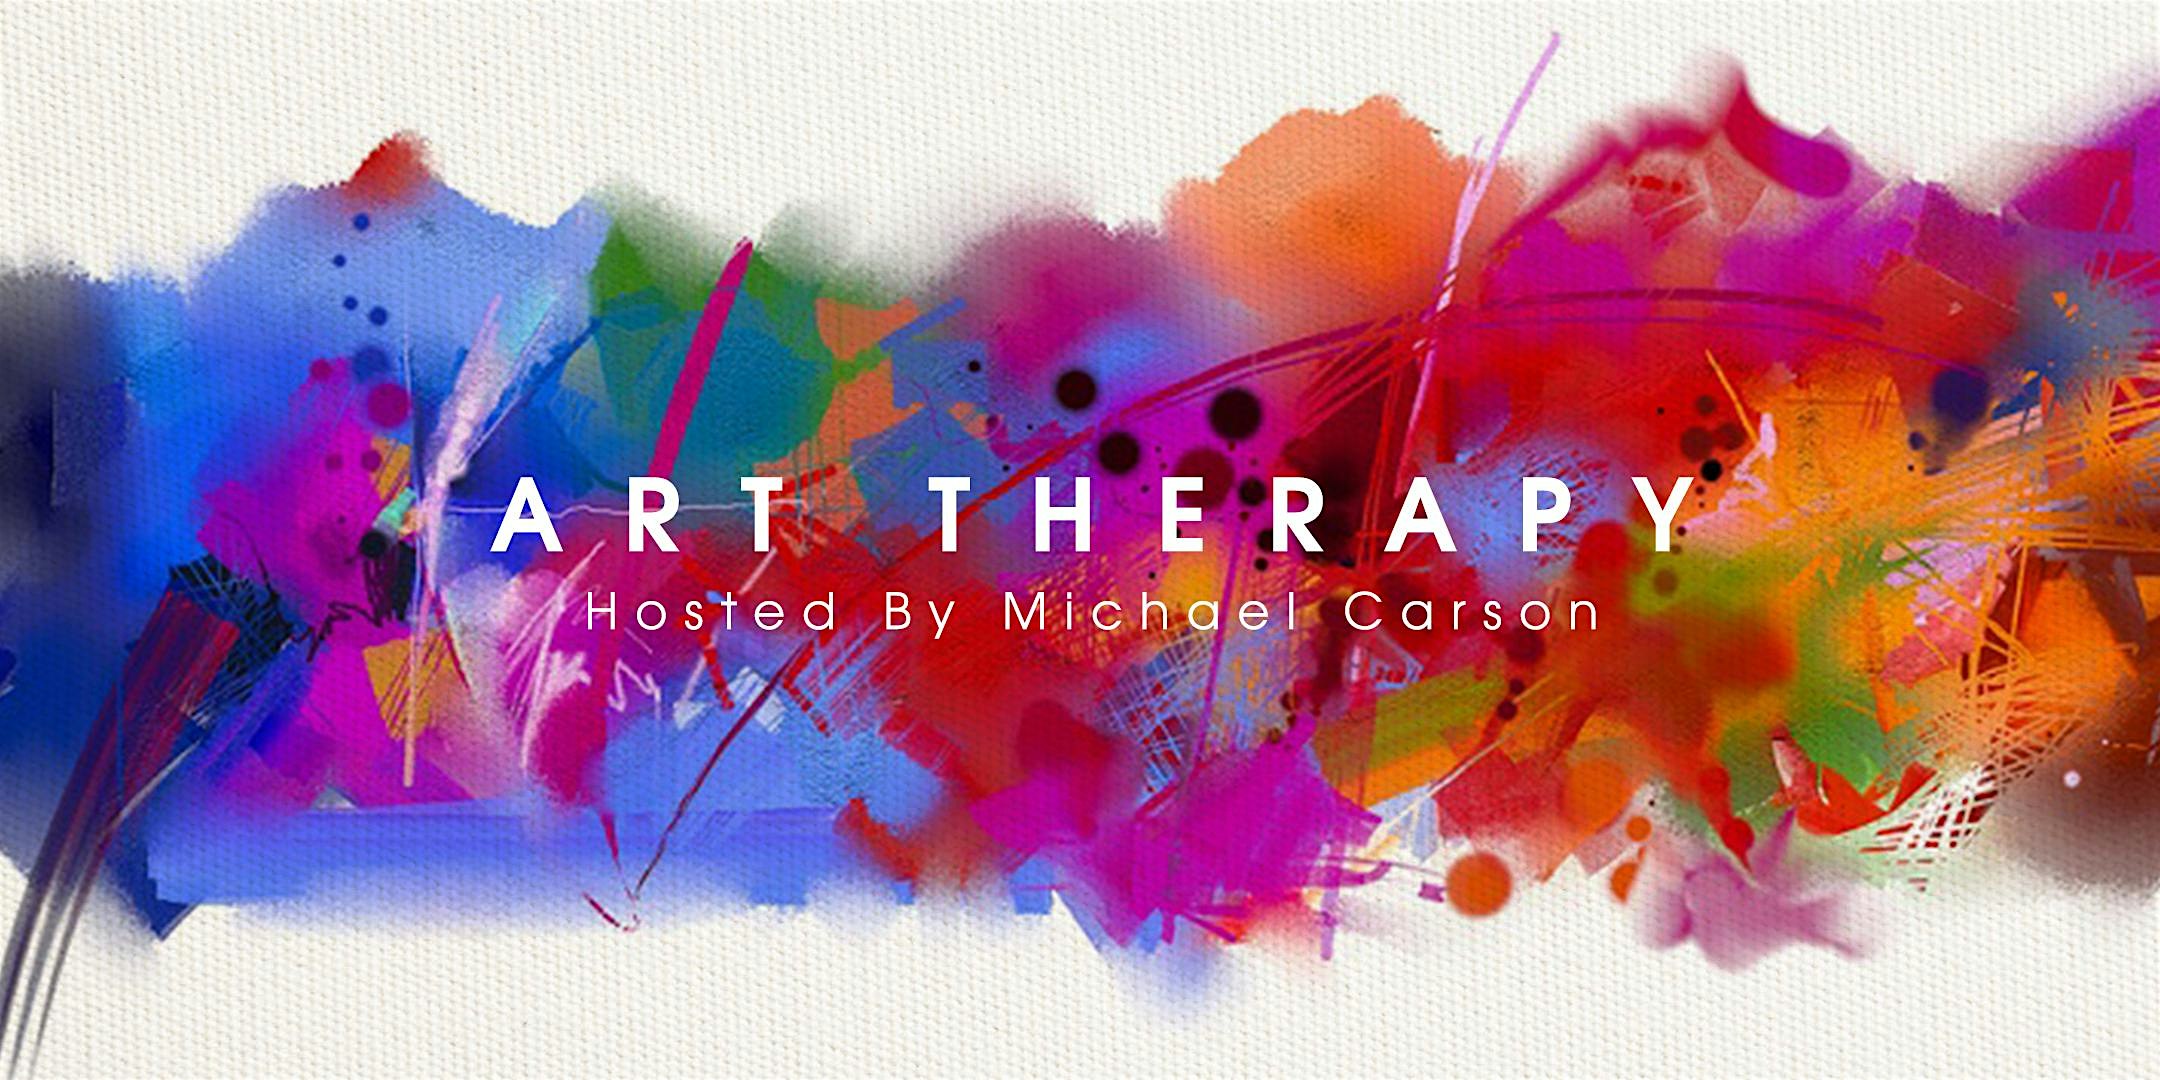 ART THERAPY Hosted By MICHAEL CARSON